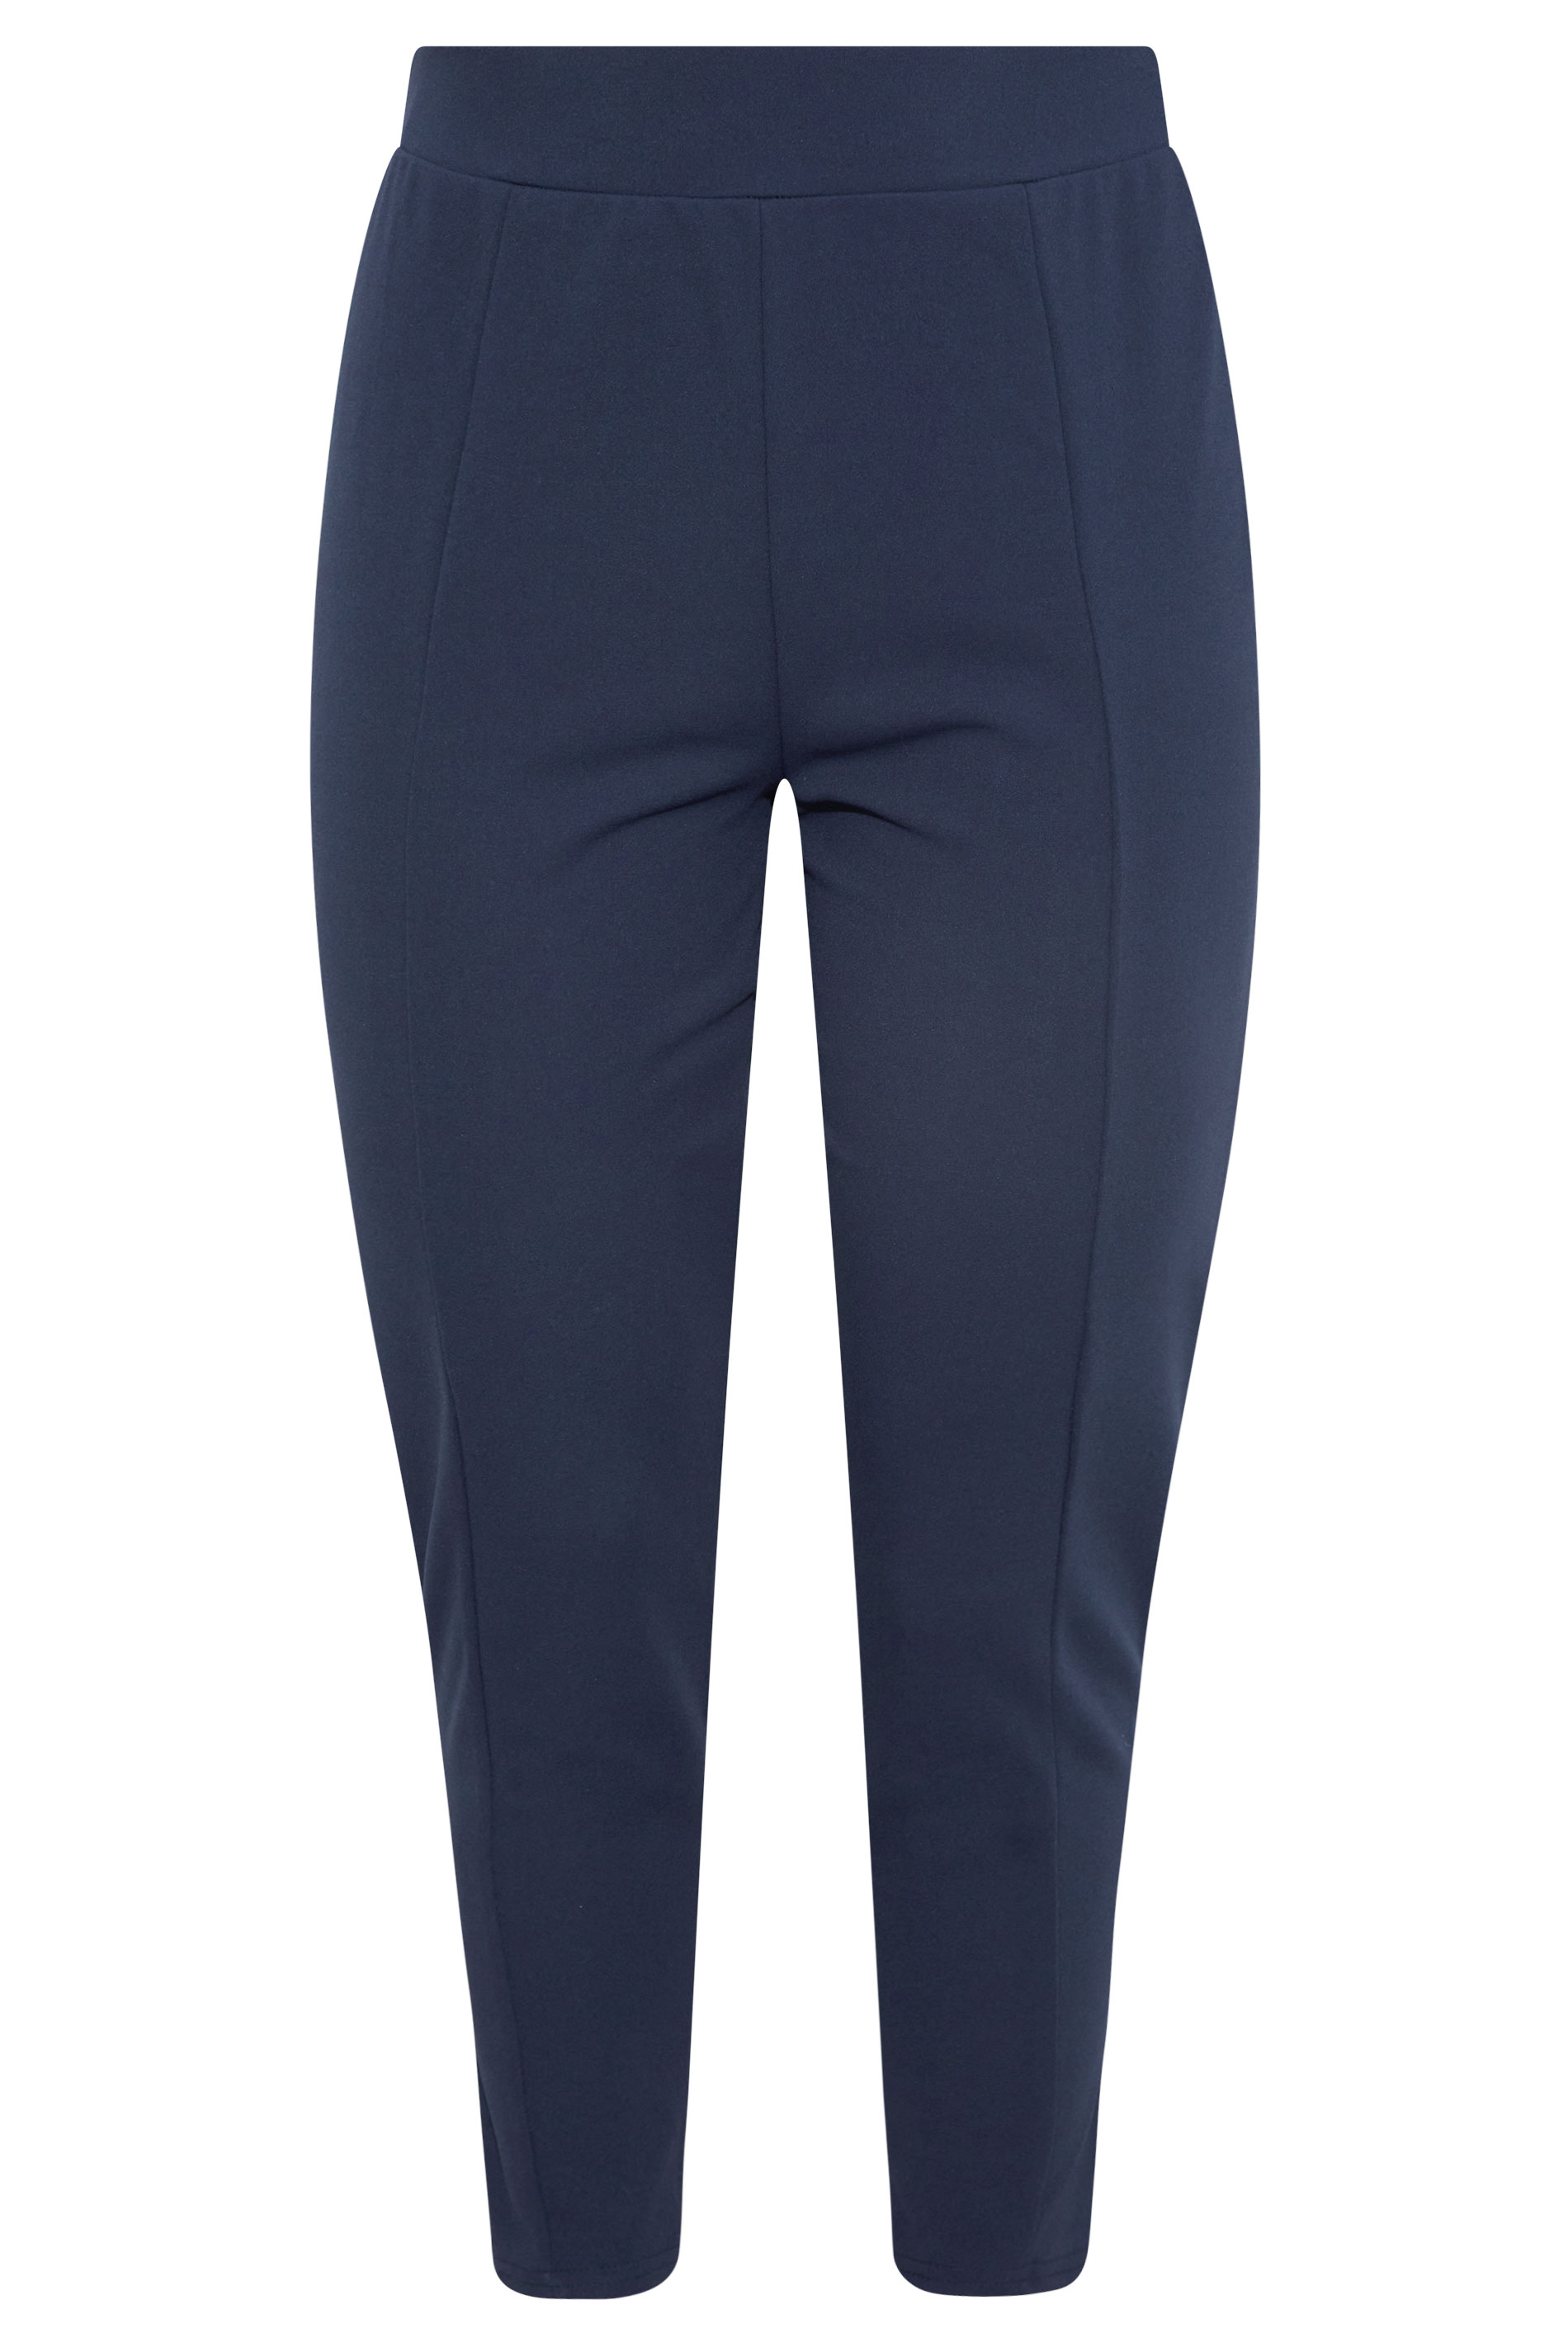 Tapered Trousers, Long tall sally, Trousers & leggings, Women